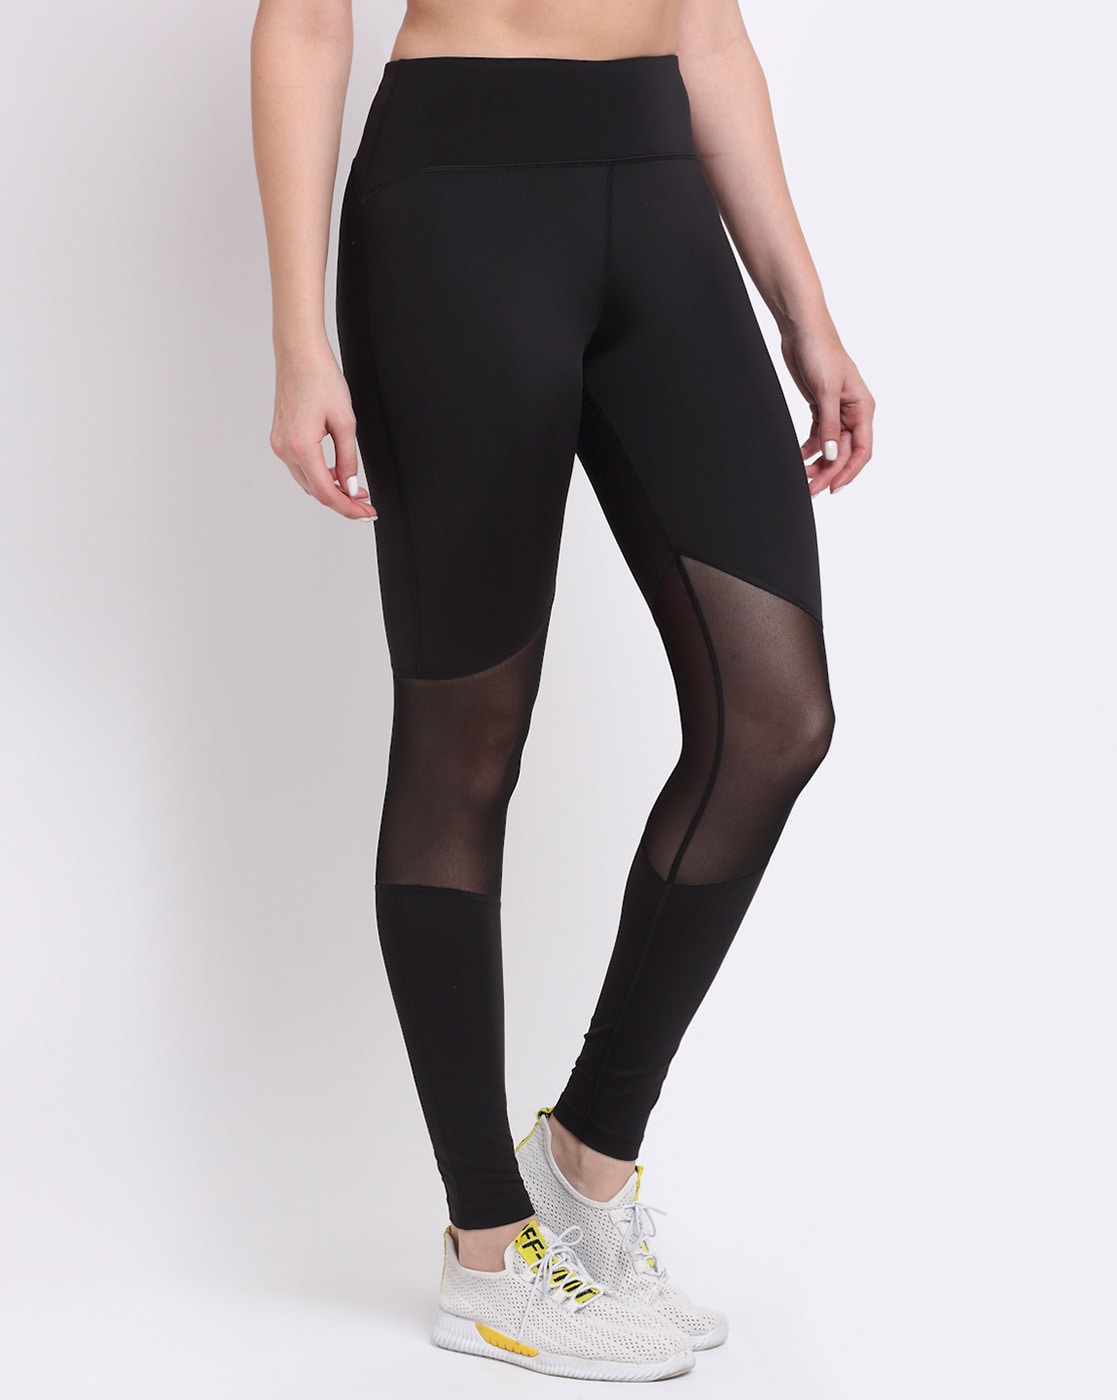 Victoria Sport Anytime Cotton Mesh-inset Leggings in S, Women's